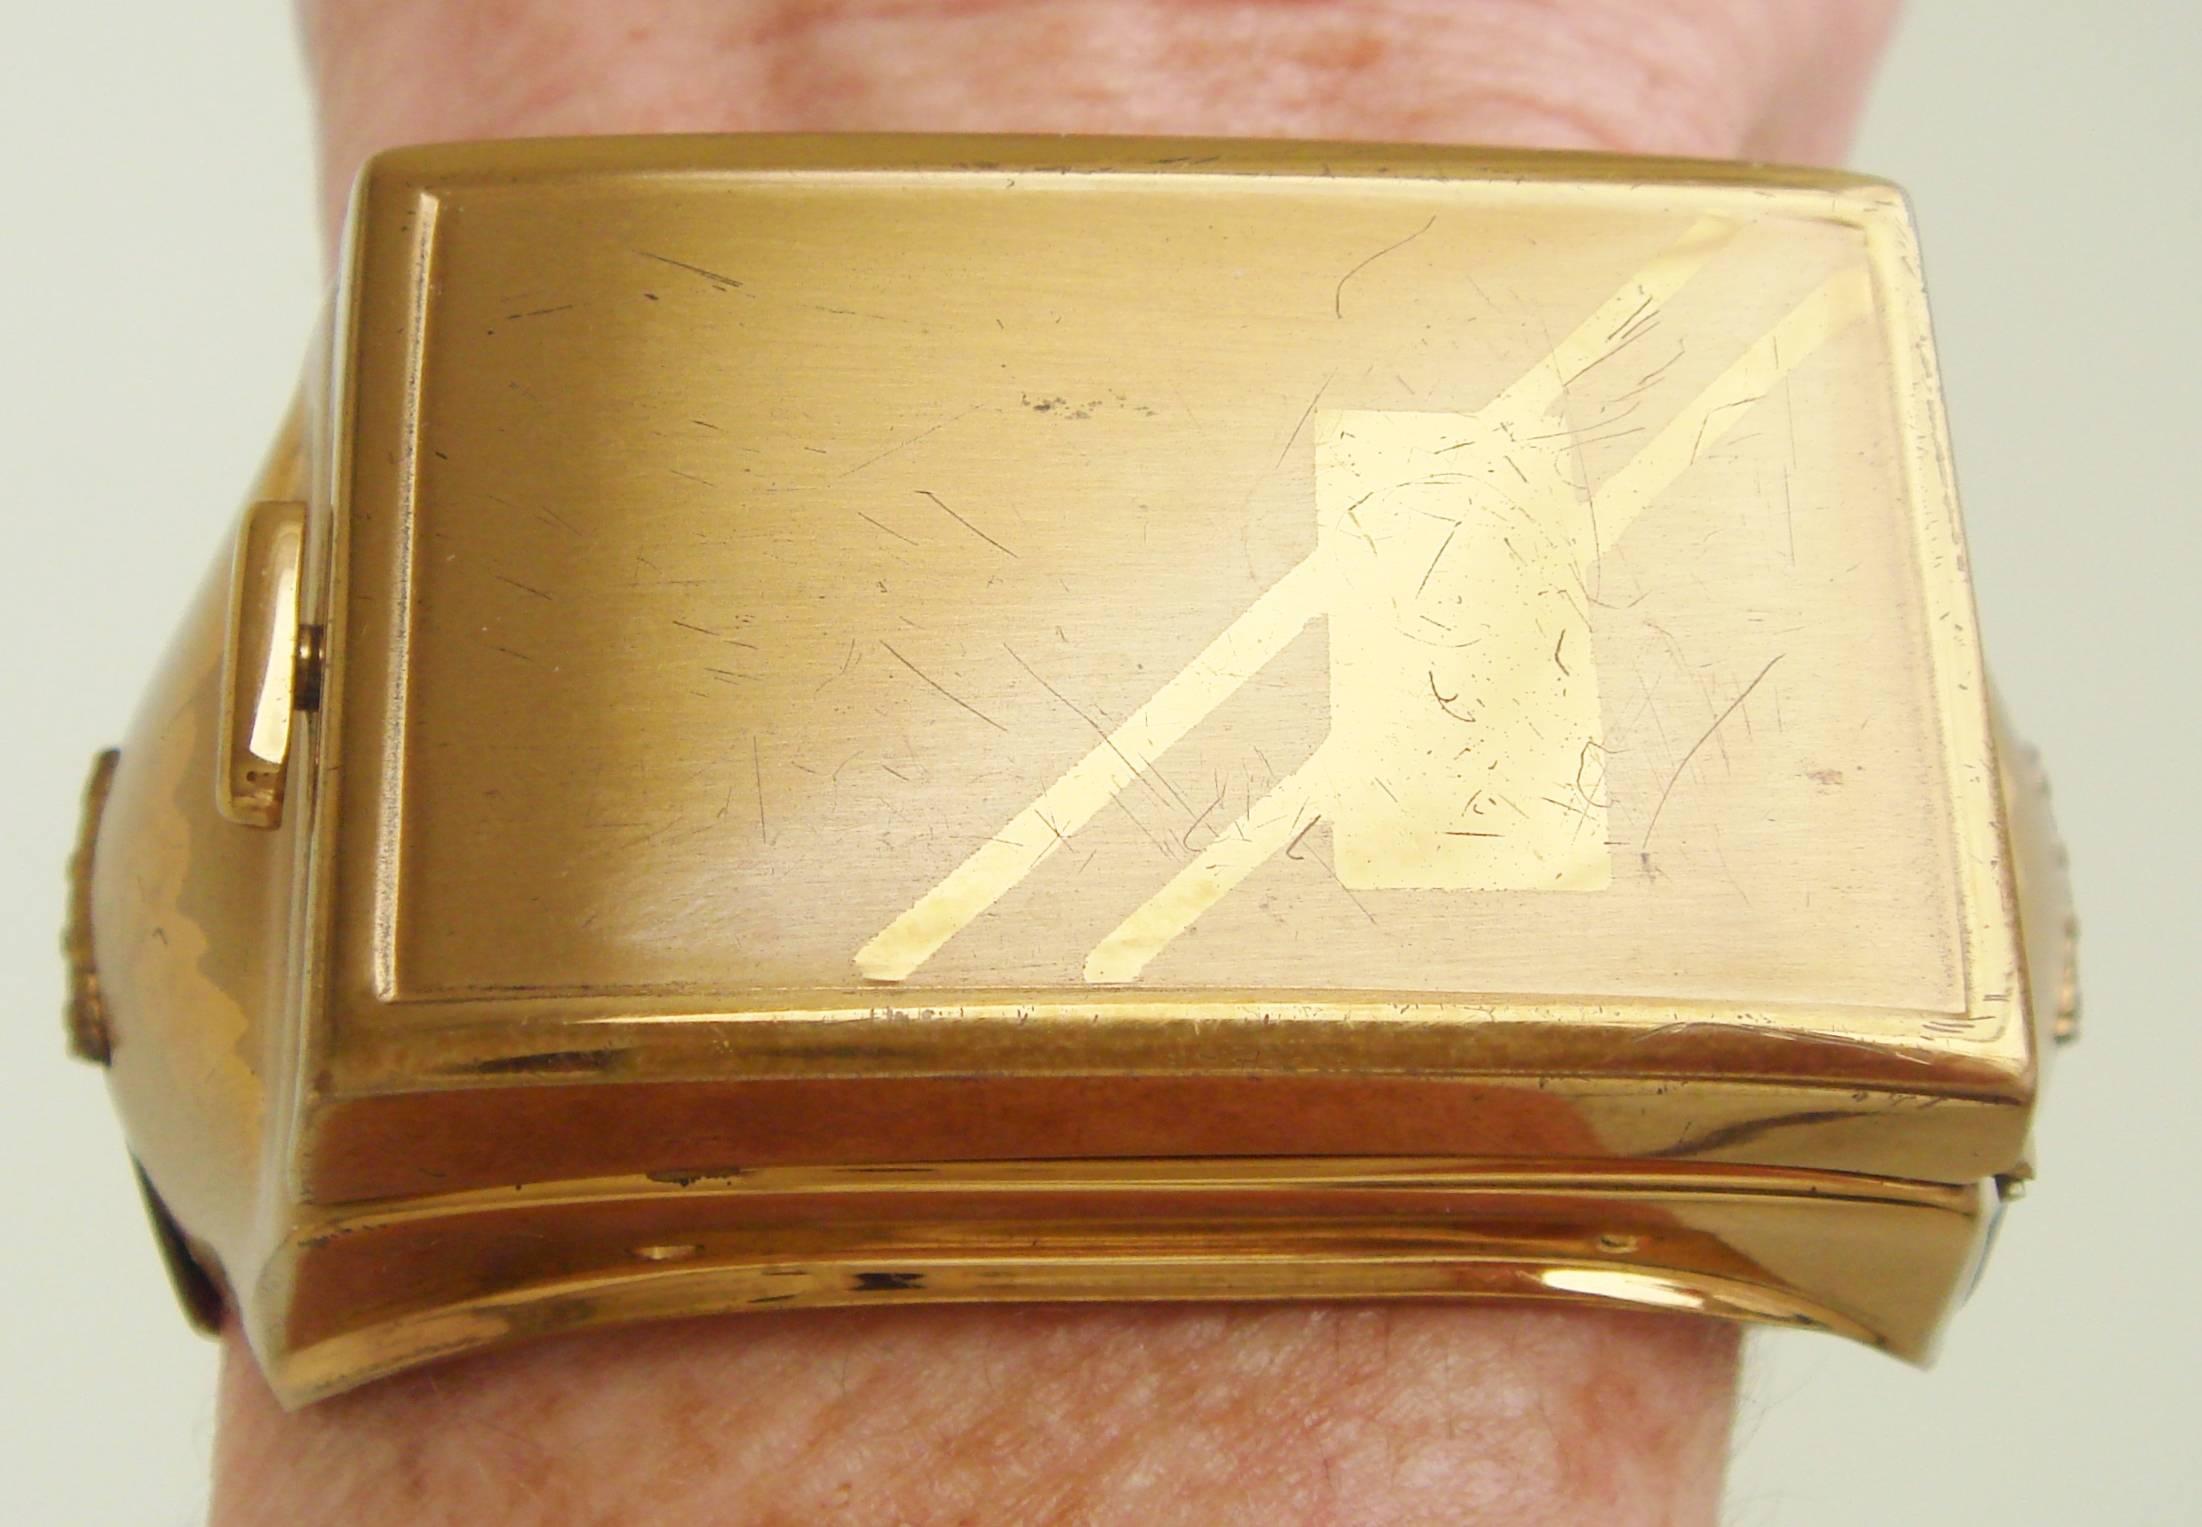 Brushed Rare American Art Deco Brass-Plated Geometric Compact Clamper Bracelet by K & K